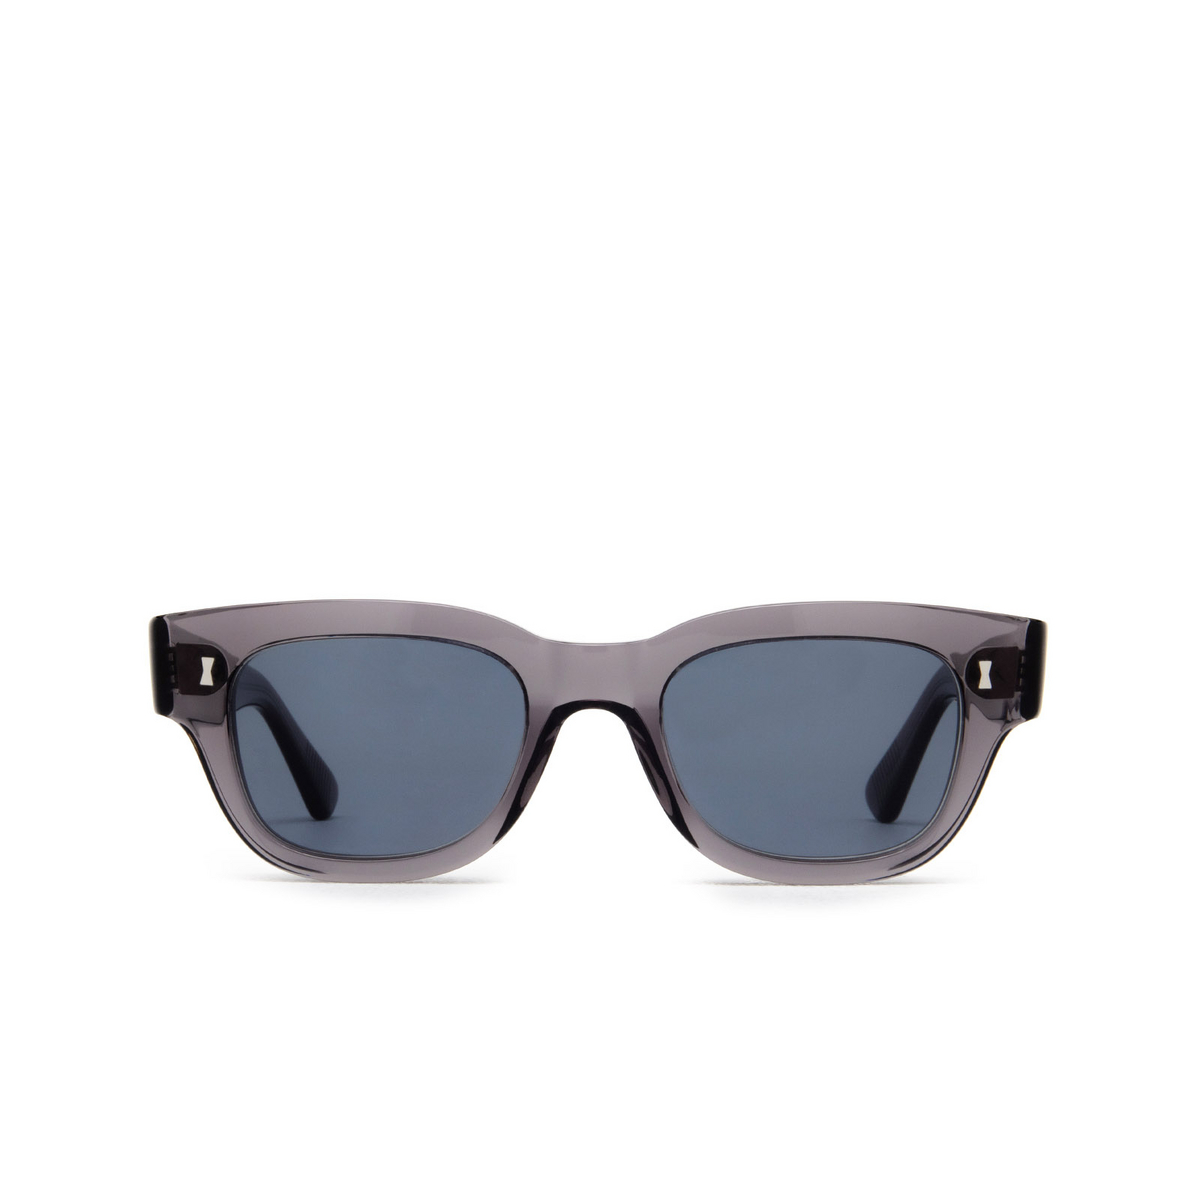 Cubitts FREDERICK Sunglasses FRE-R-SMO Smoke Grey - front view